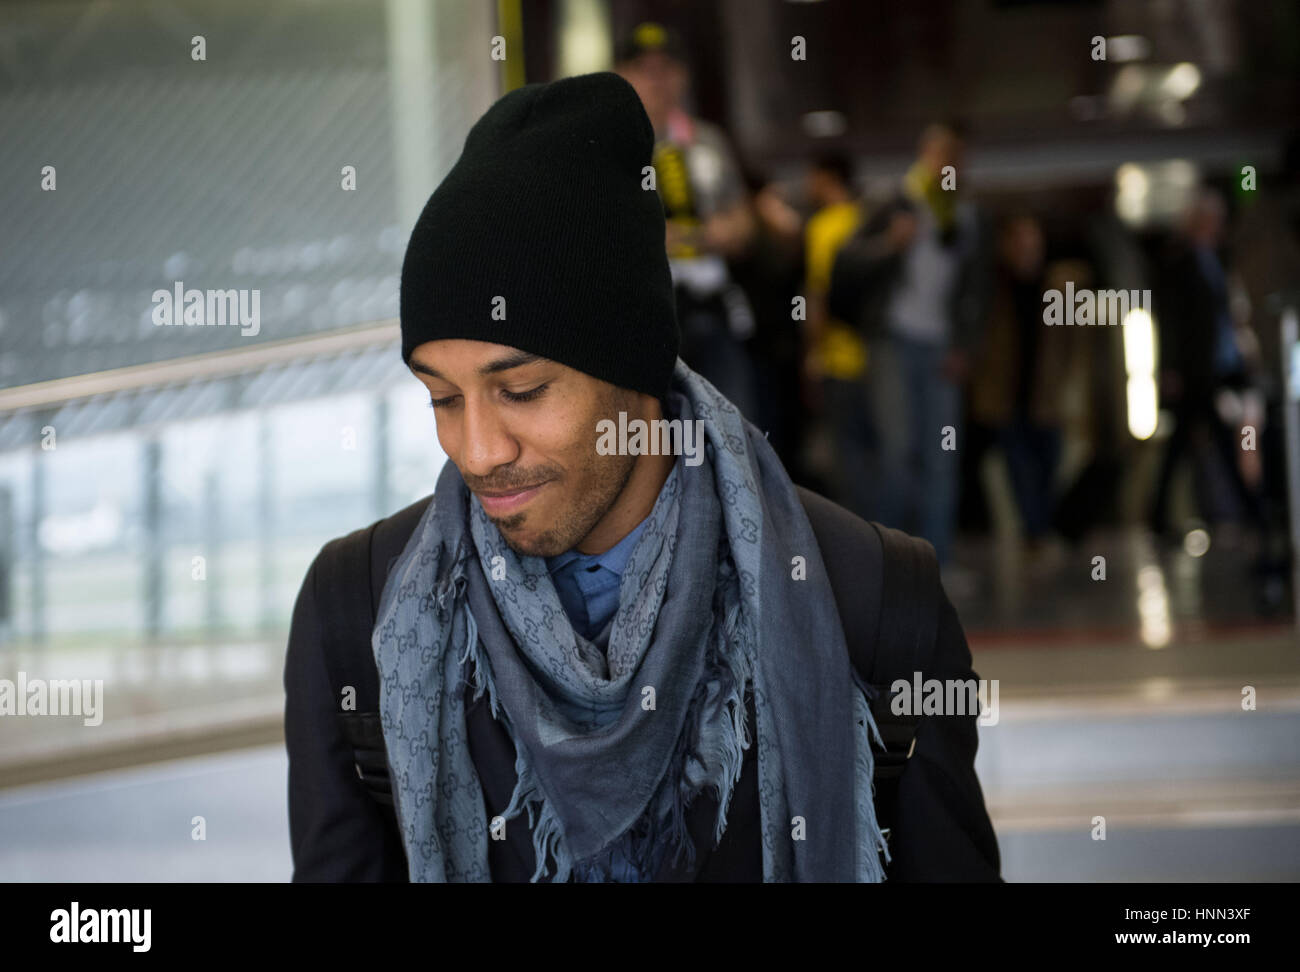 Lisbon, Portugal. 15th Feb, 2017. Borussia Dortmund player Pierre-Emerick Aubameyang waits for the return flight at the airport in Lisbon, Portugal, 15 February 2017. BVB were defeated in the round of 16 soccer Champions Legaue match by S.L. Benfica. Photo: Bernd Thissen/dpa/Alamy Live News Stock Photo